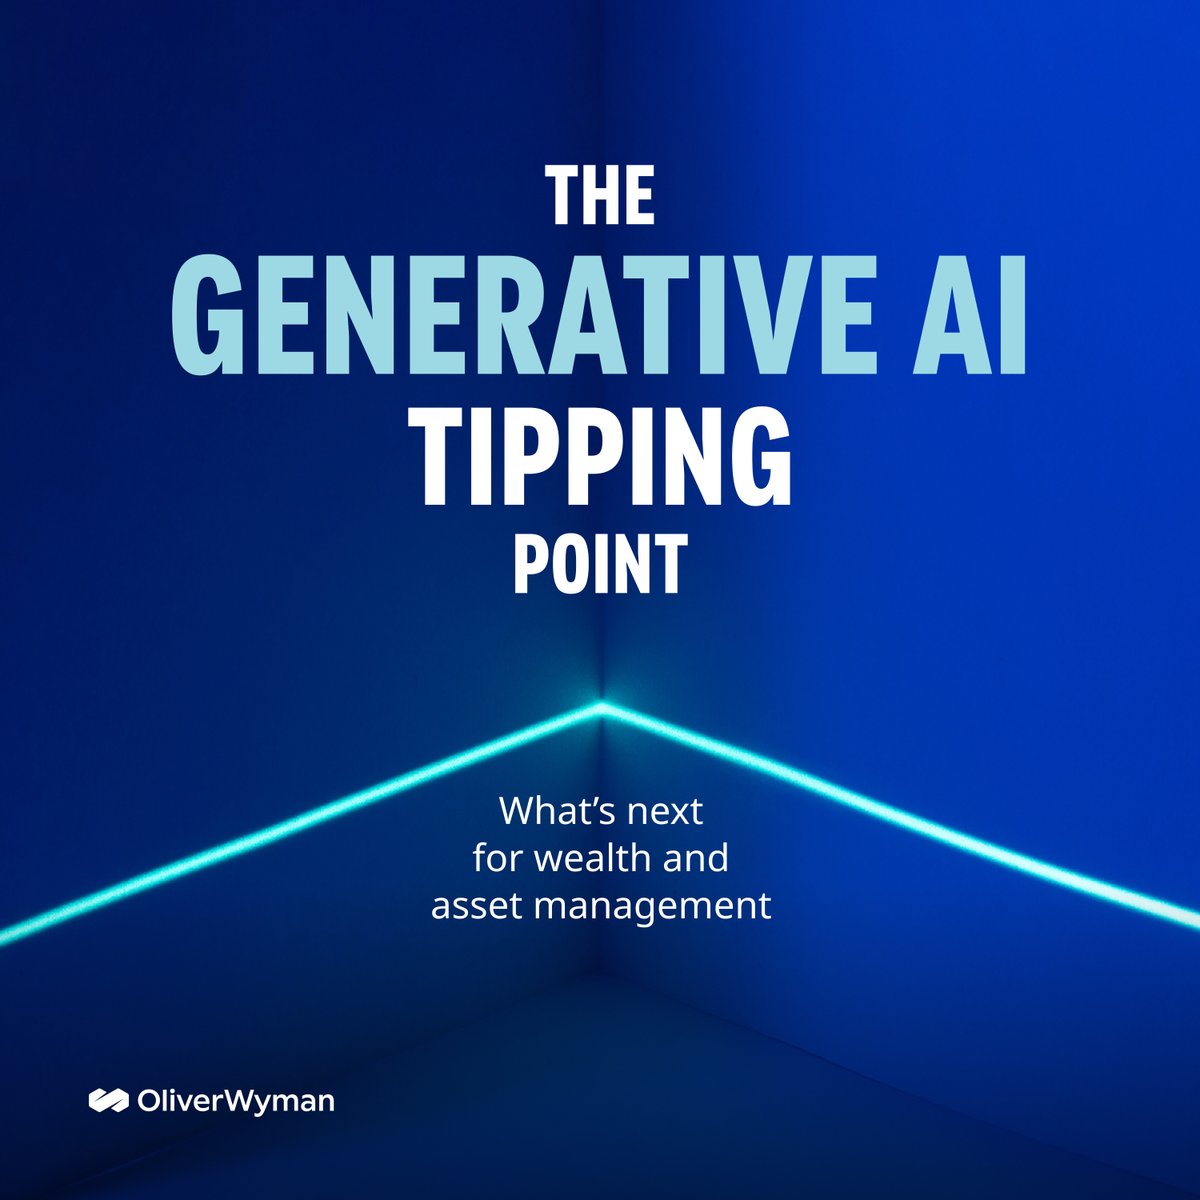 What's next for the #AssetManagement industry? And how can #GenAI revolutionize the industry? Join Josh Zwick and Kamil Kaczmarski, Partners from @OliverWyman as they explore The Generative AI Tipping Point in a podcast episode. Tune in to learn more > owy.mn/3PNPc7T